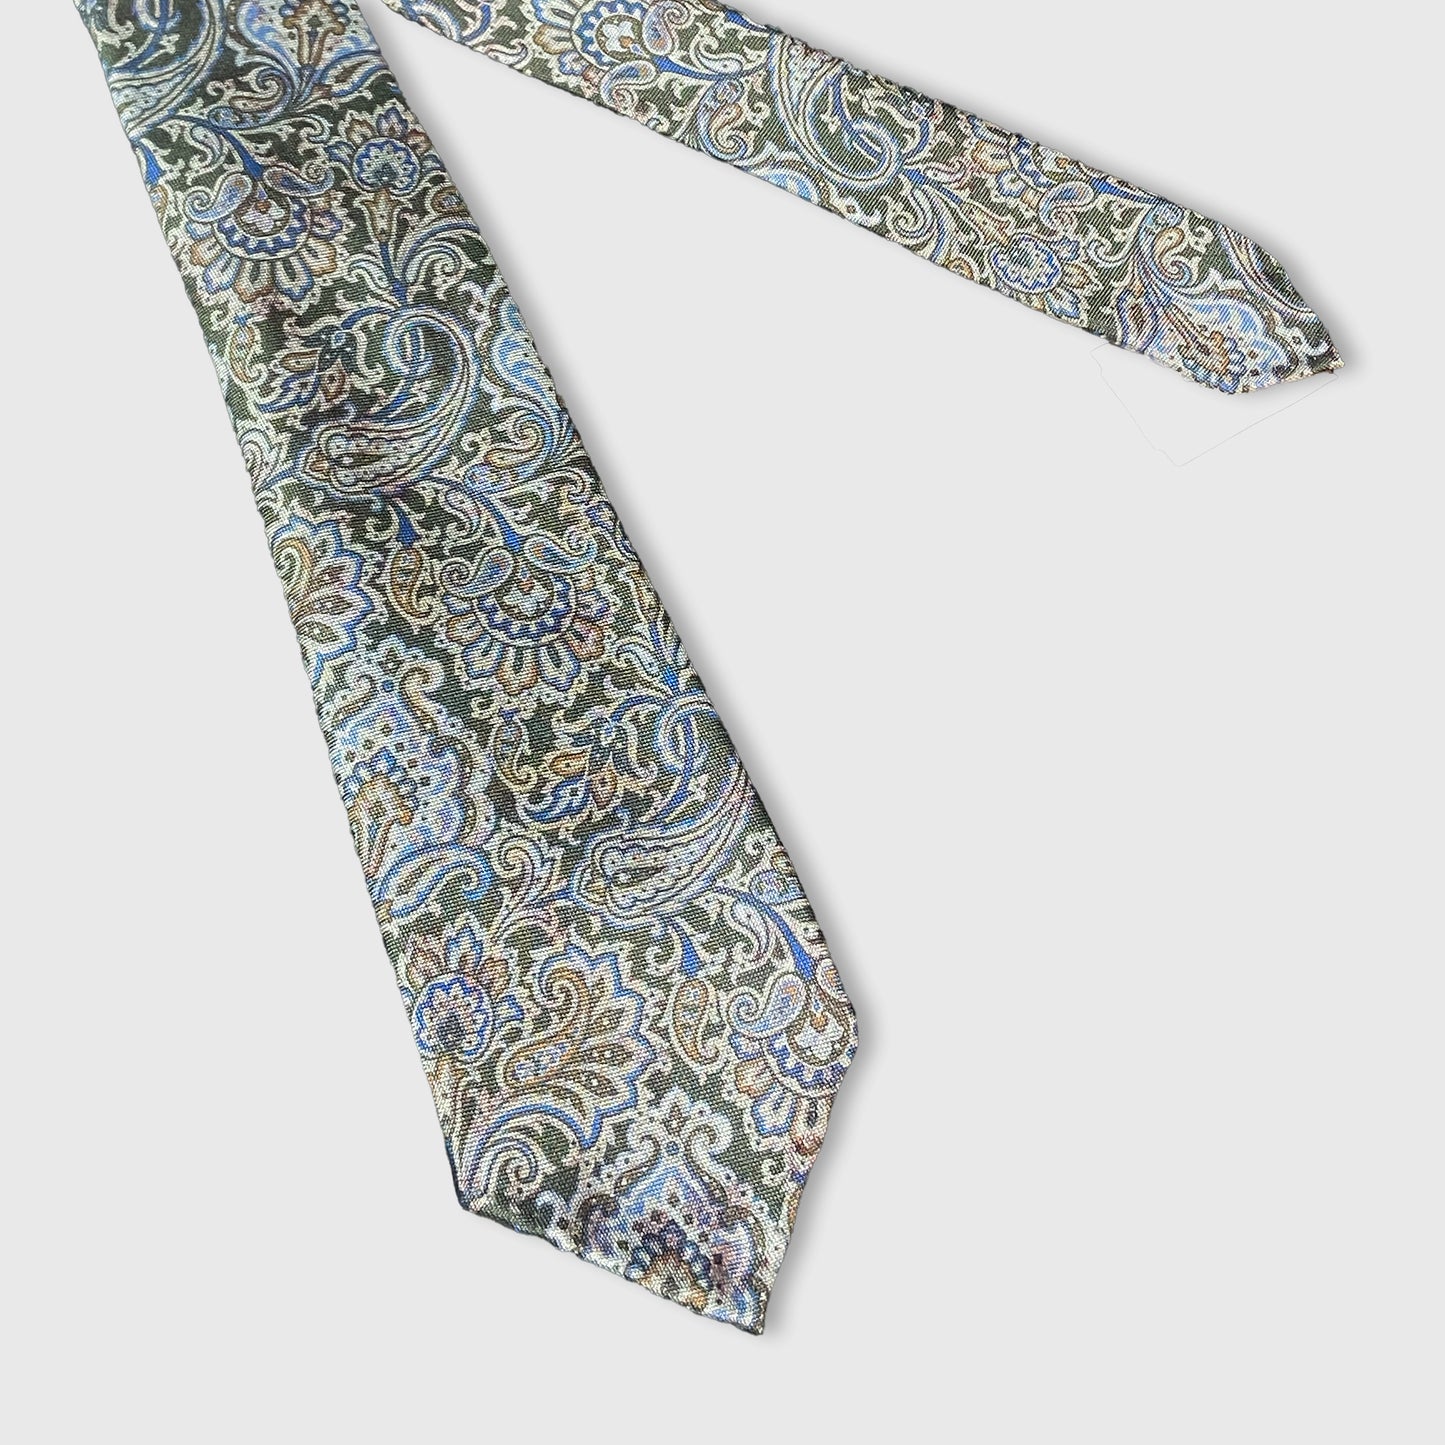 Olive Green, Light Blue and Marigold Paisley Woven, Sevenfold Silk Tie